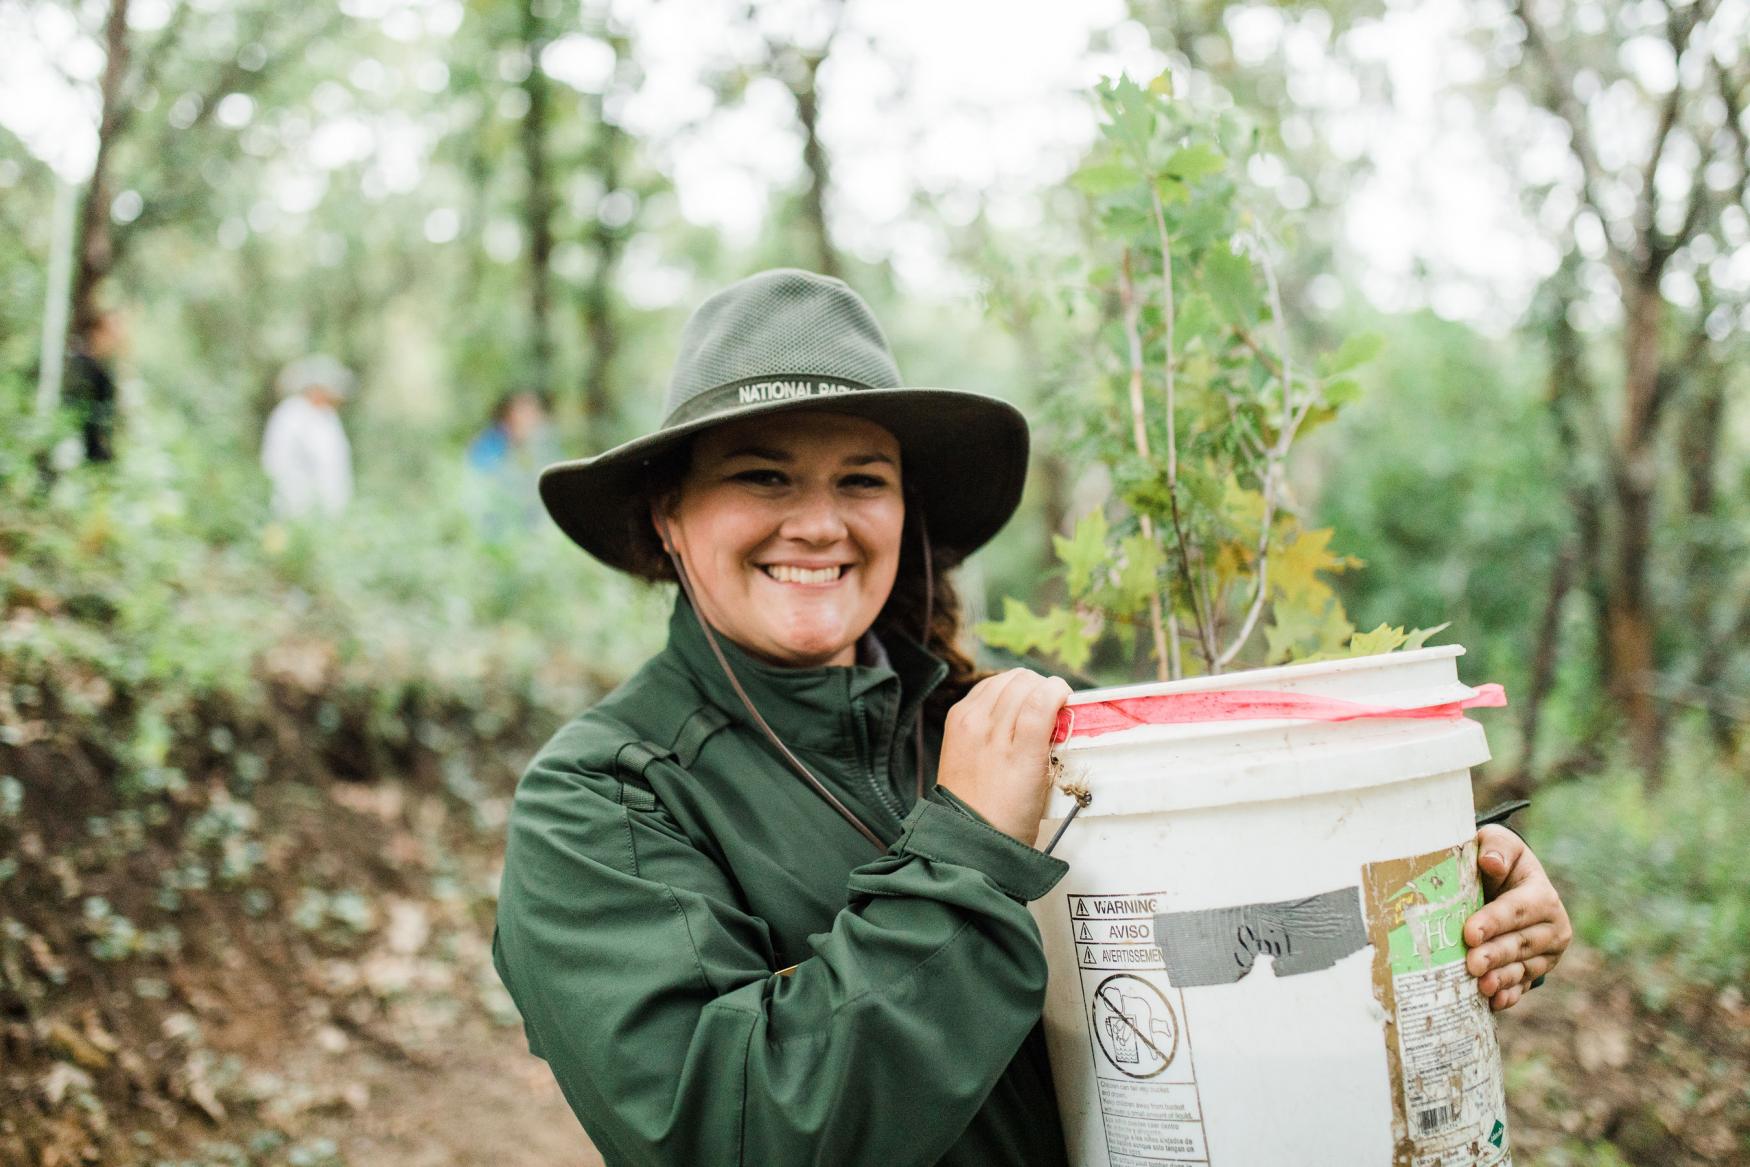 Smiling woman outdoors in raingear and hat holding a white bucket with tree sapling 